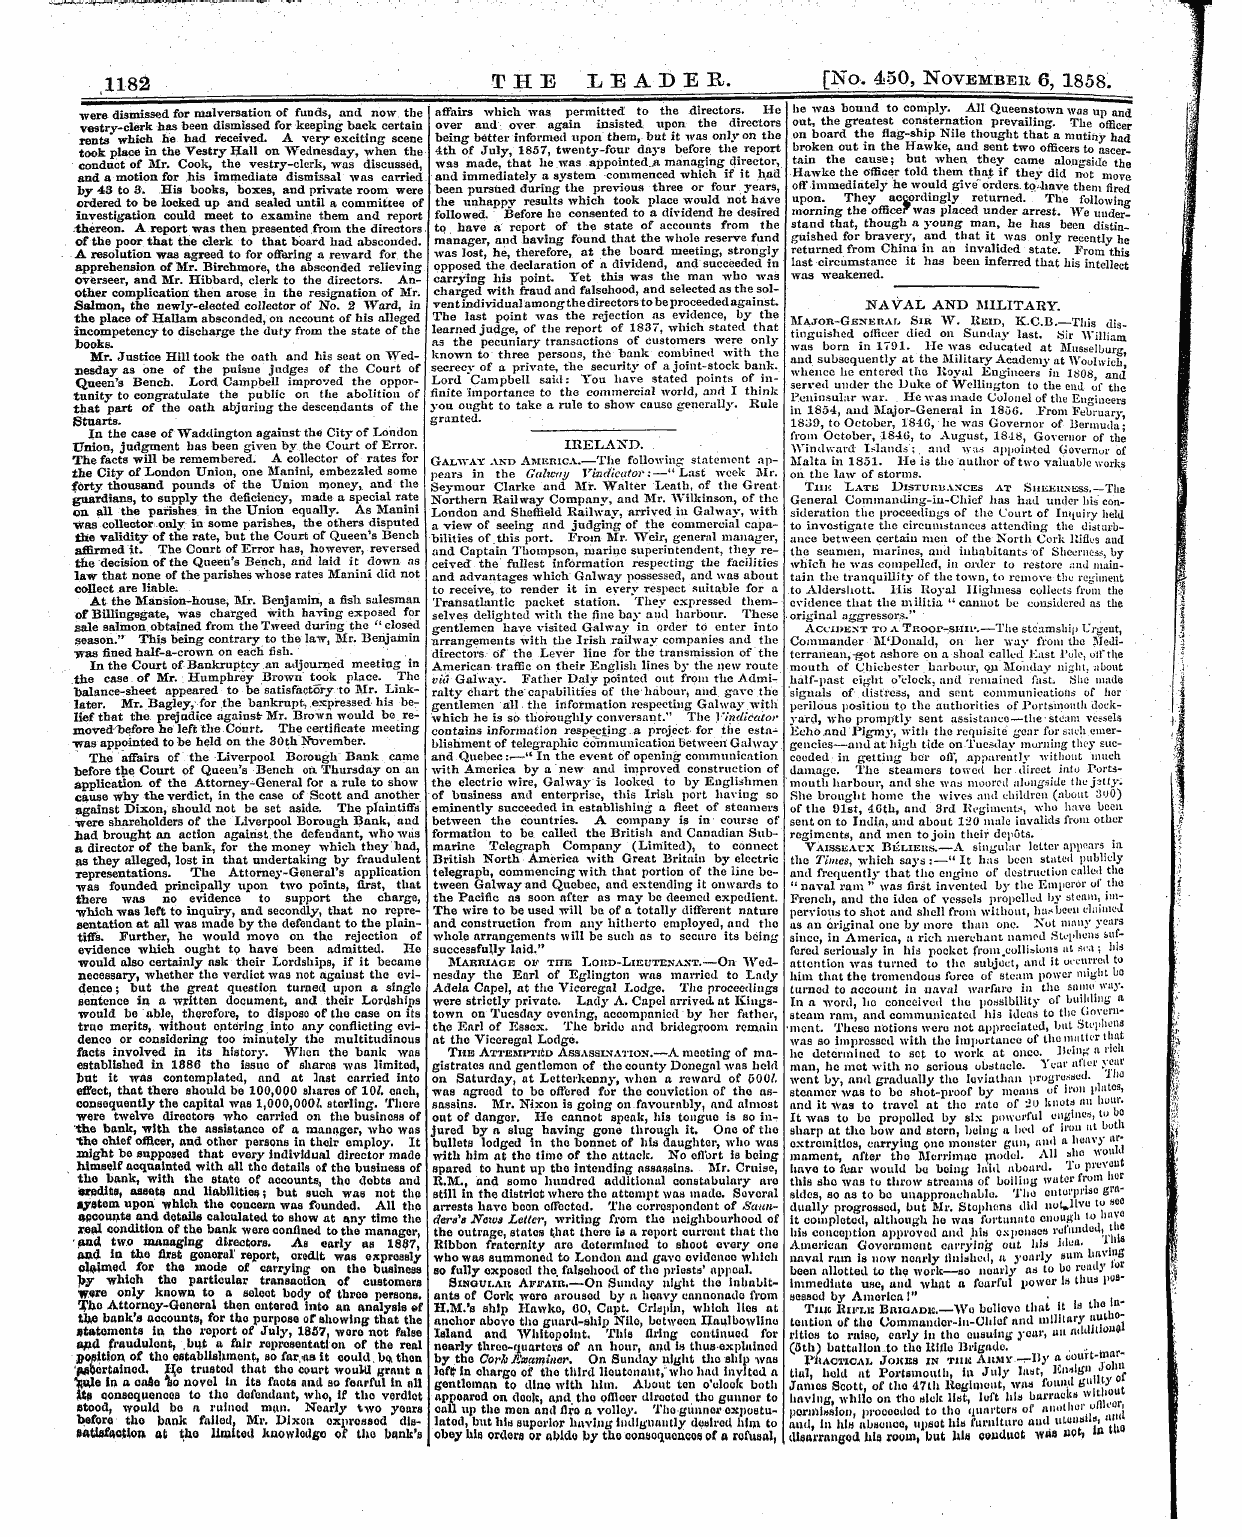 Leader (1850-1860): jS F Y, 1st edition: 6